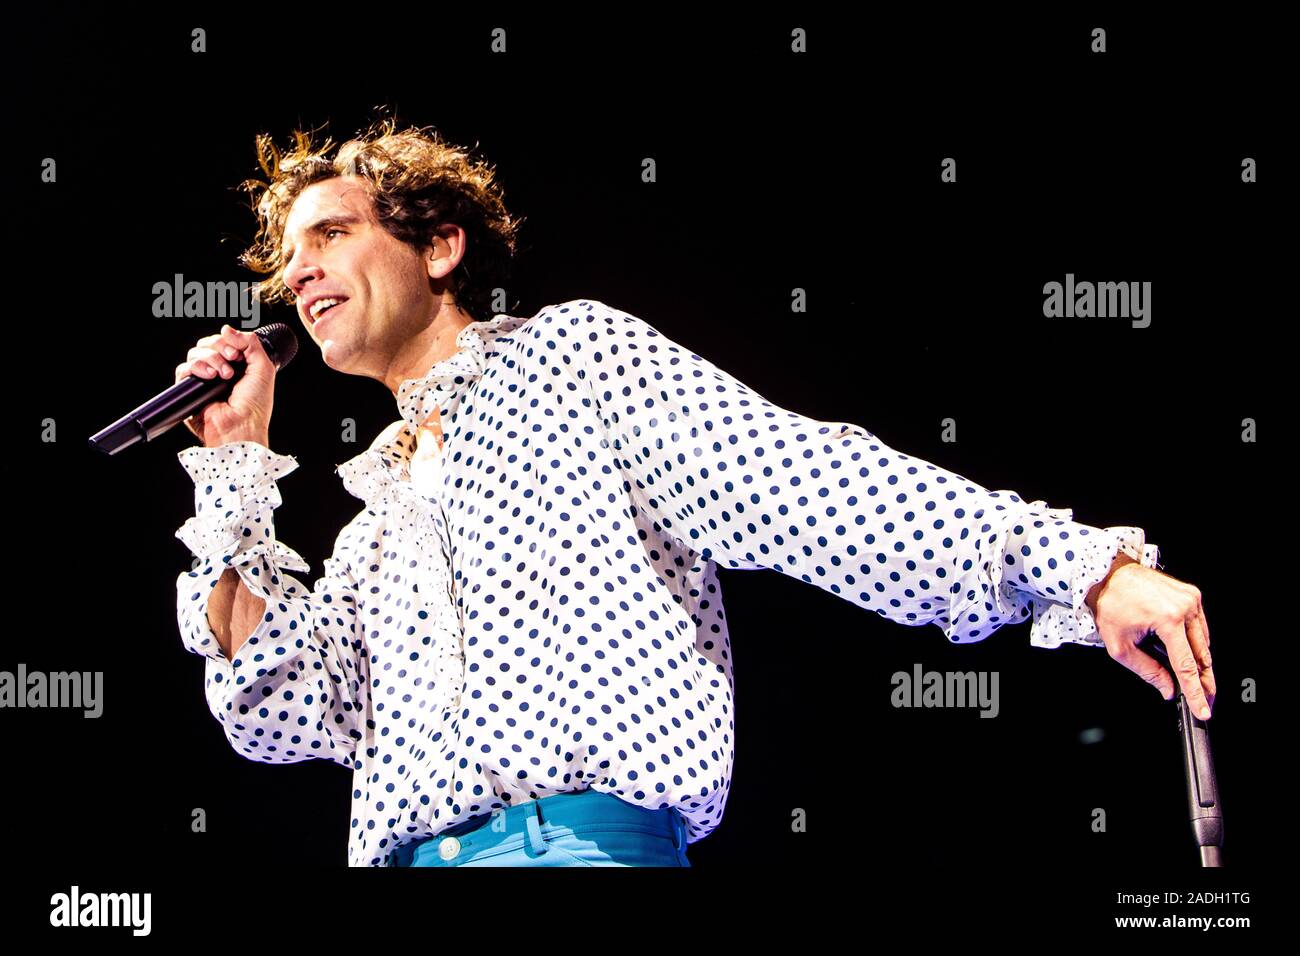 Mika performs live at Mediolanum Forum in Milano, Italy, on December 03  2019. Mika is an English recording artist and singer-songwriter, and He was  named the number-one predicted breakthrough act of 2007